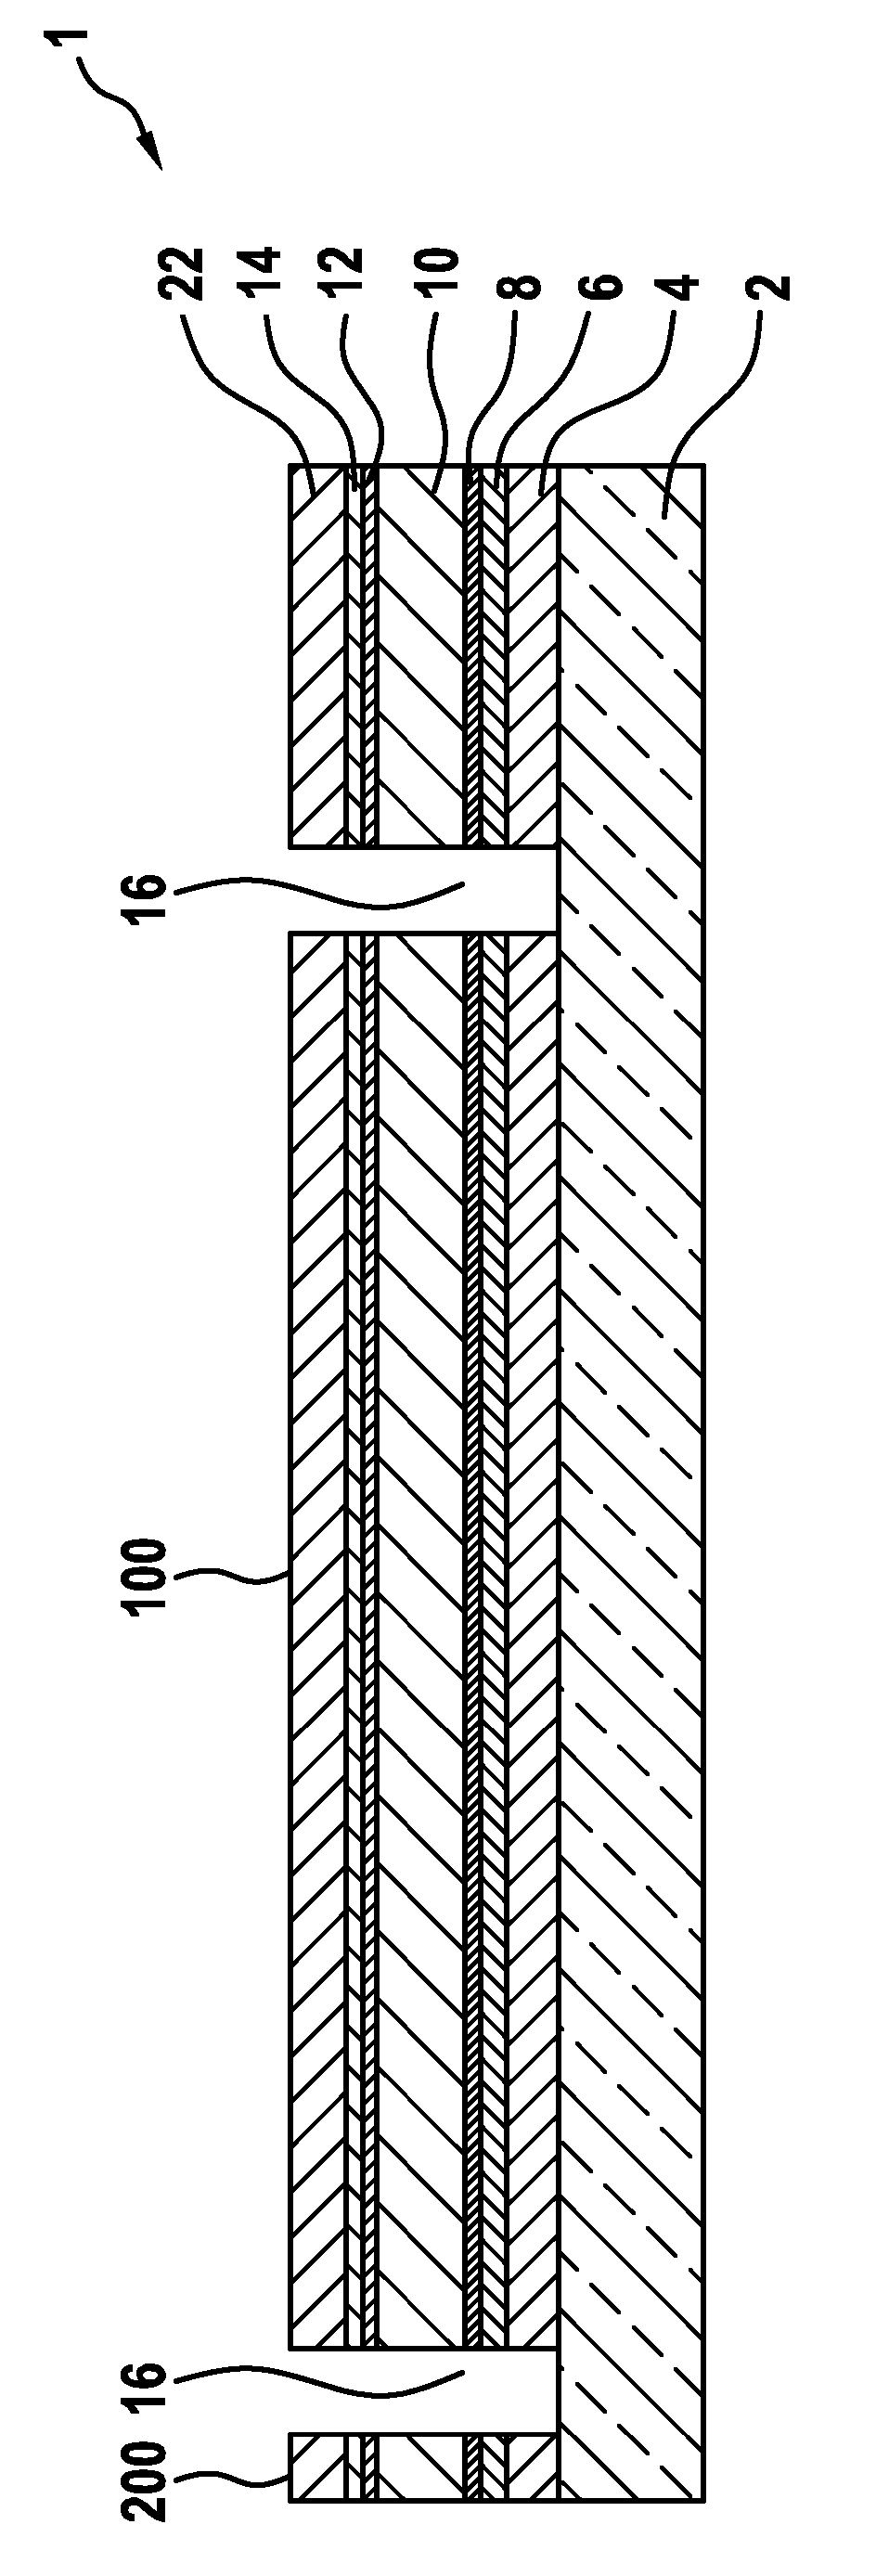 Photovoltaic thin-film solar modules and method for producing such thin-film solar modules